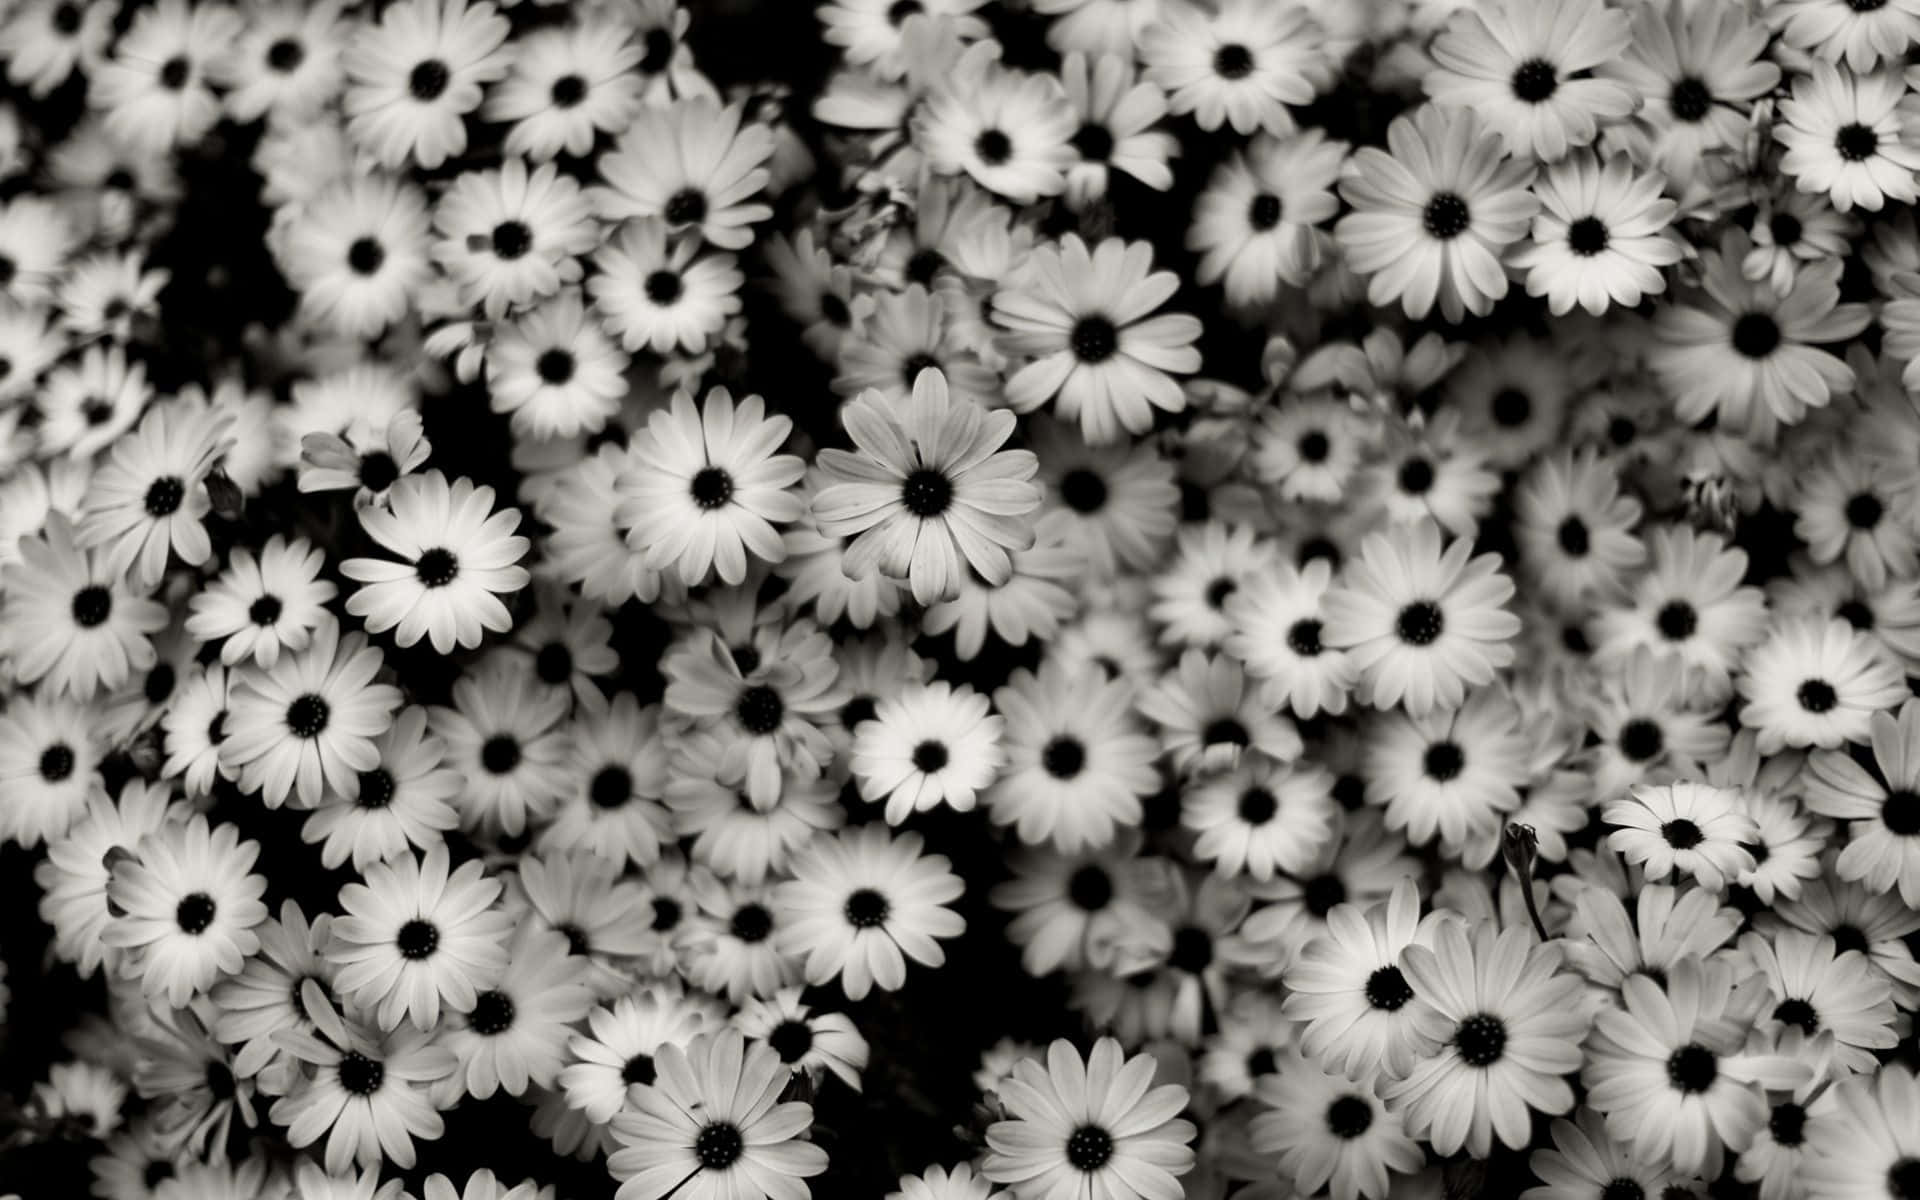 Flowers With Black And White Petals and Pistils Wallpaper